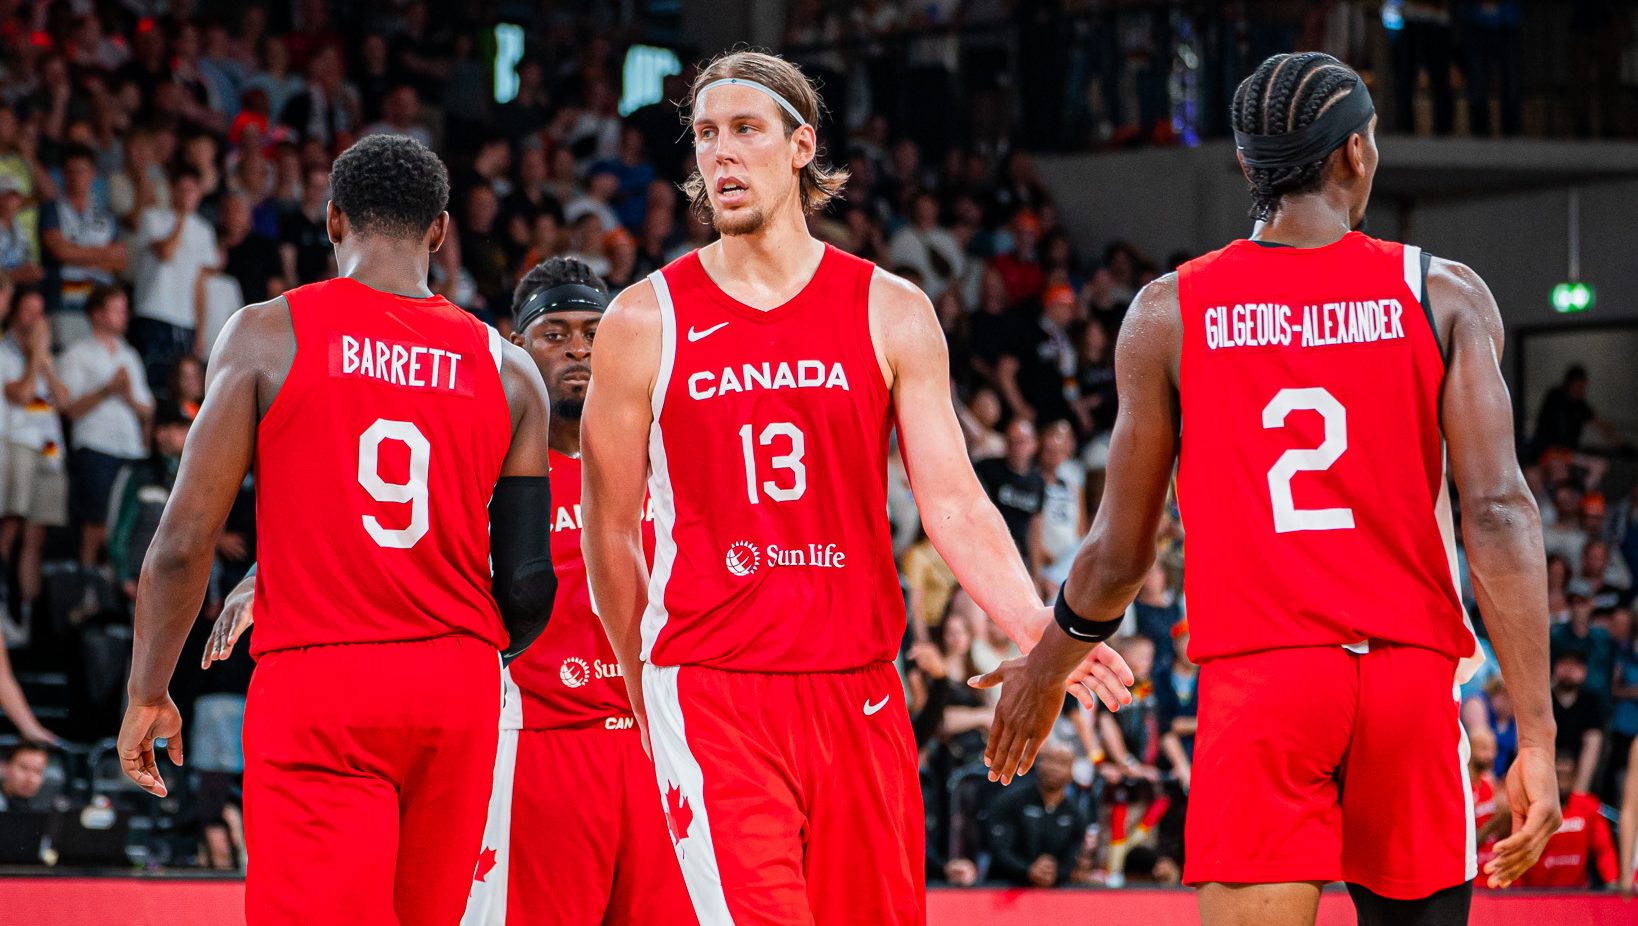 Star-studded men's basketball team chasing breakthrough for Canada at FIBA  World Cup - Team Canada - Official Olympic Team Website